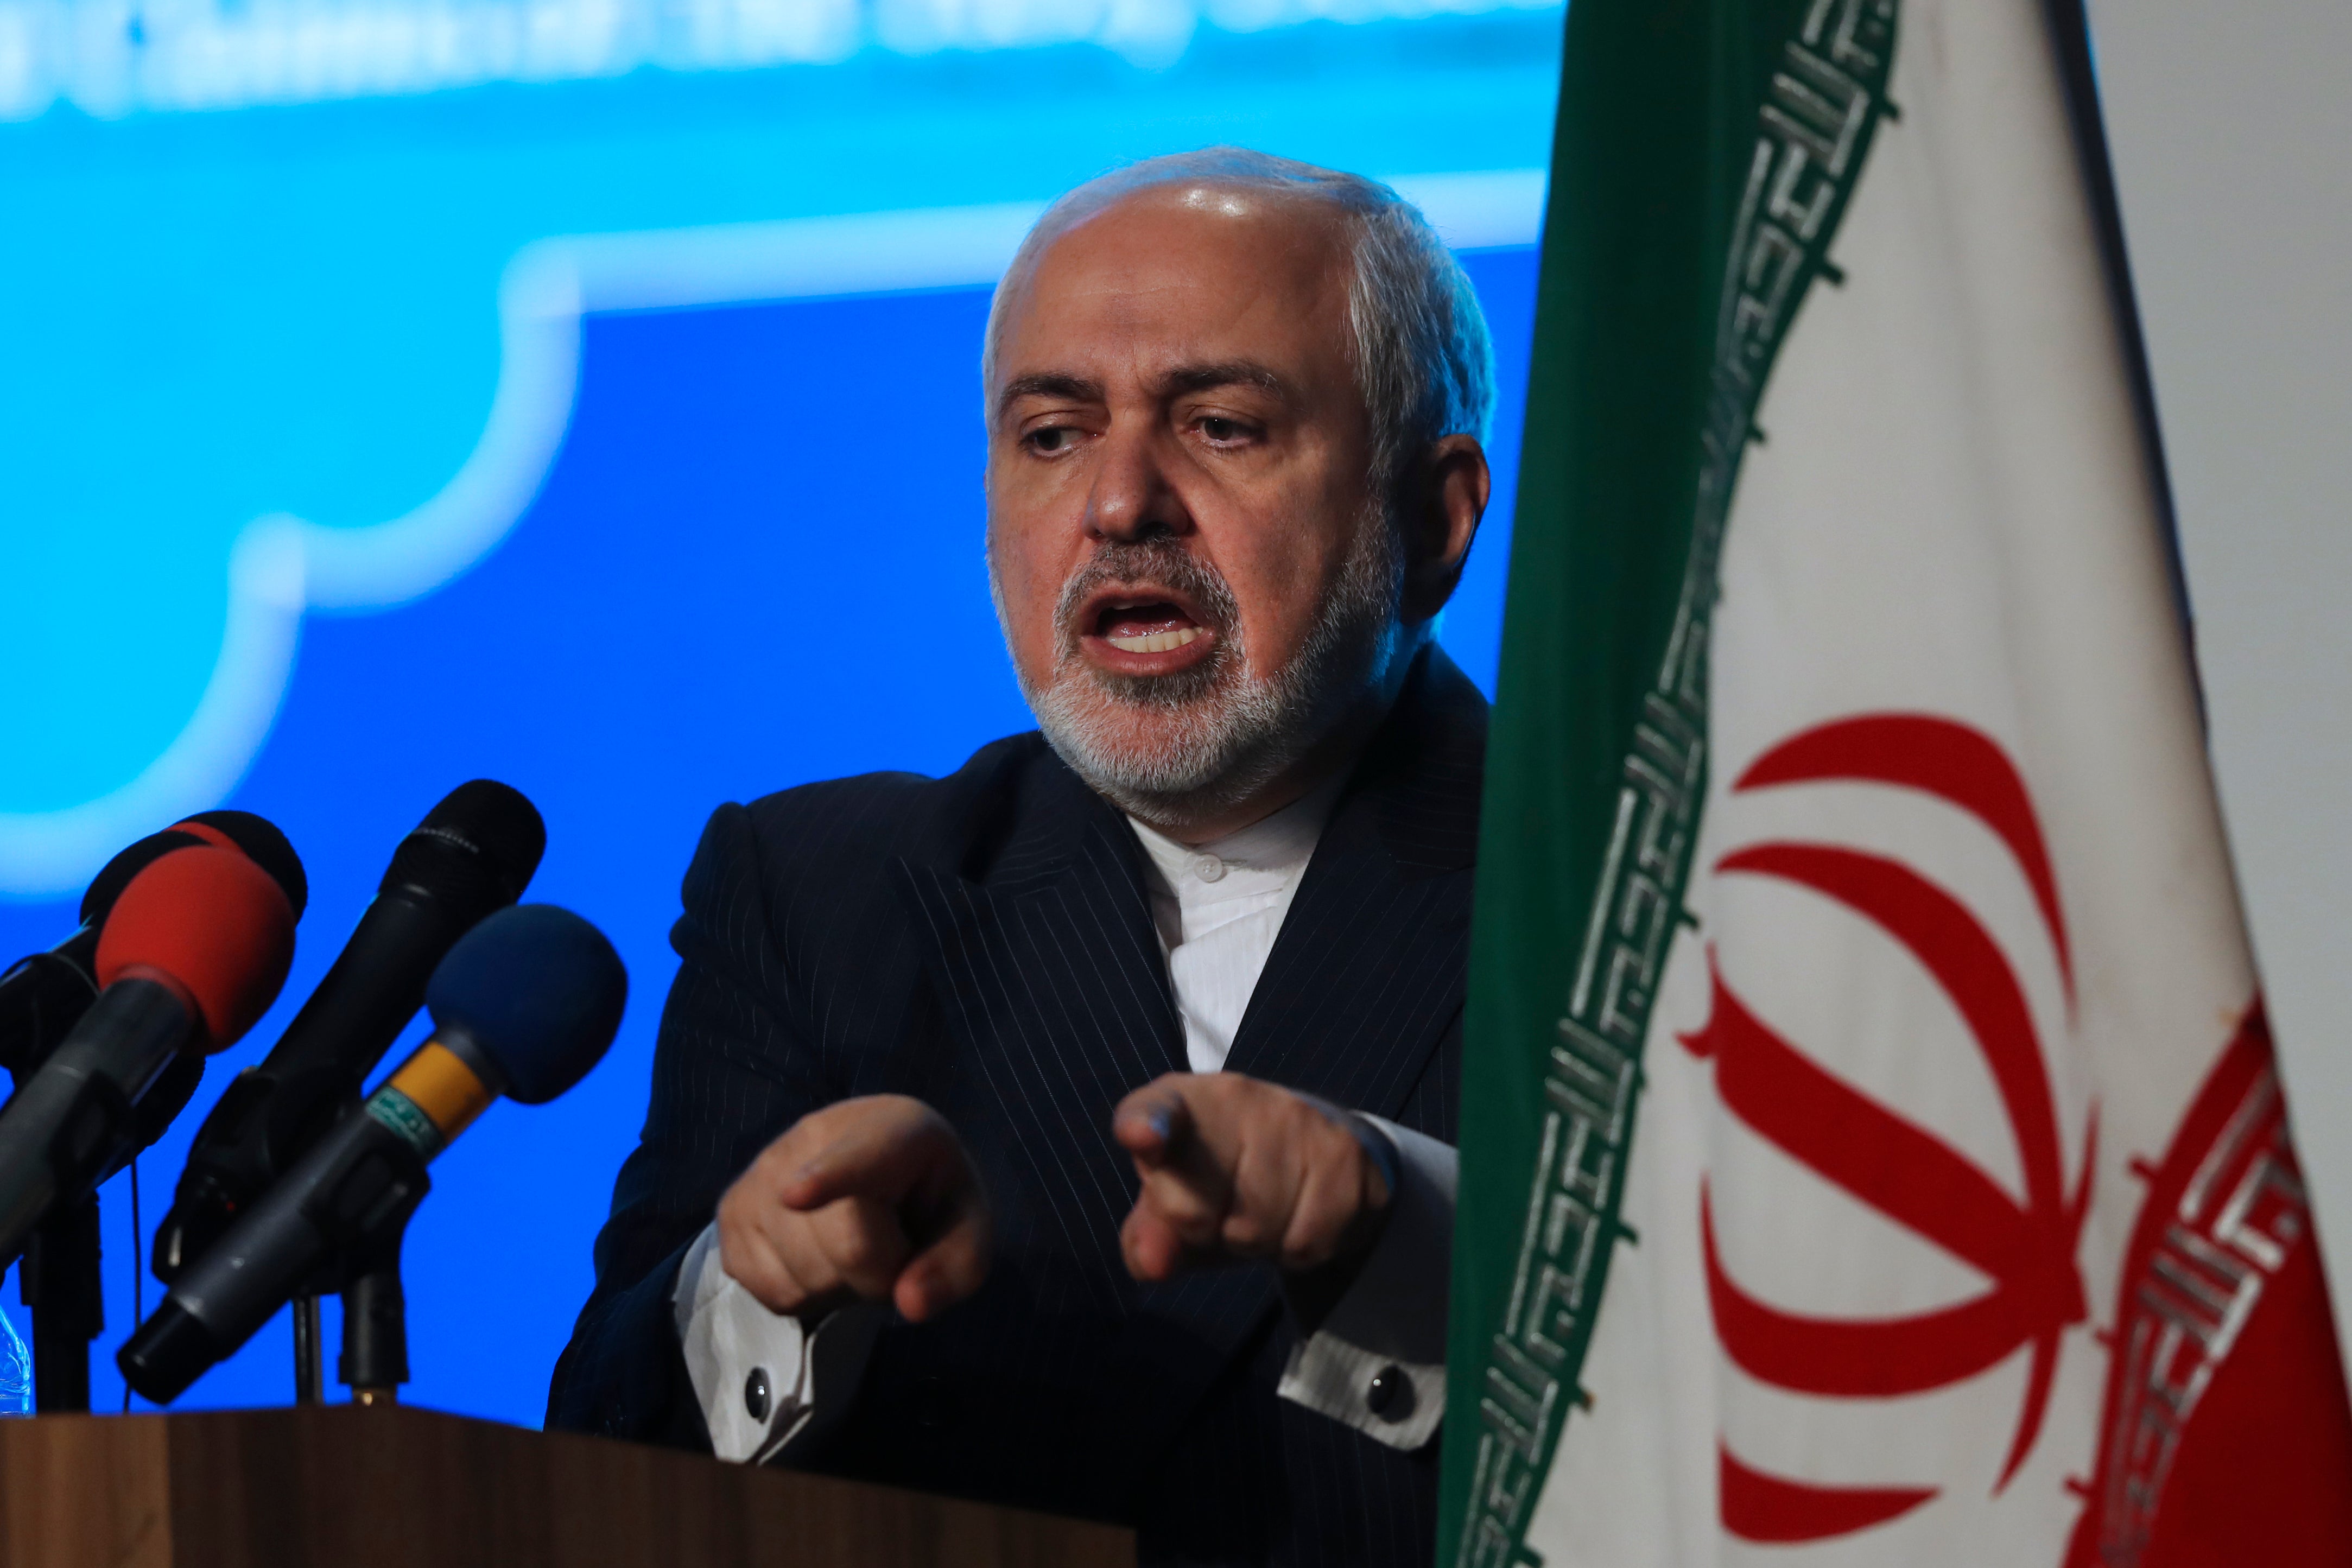 Pointing the finger: Iran's Foreign Minister Mohammad Javad Zarif